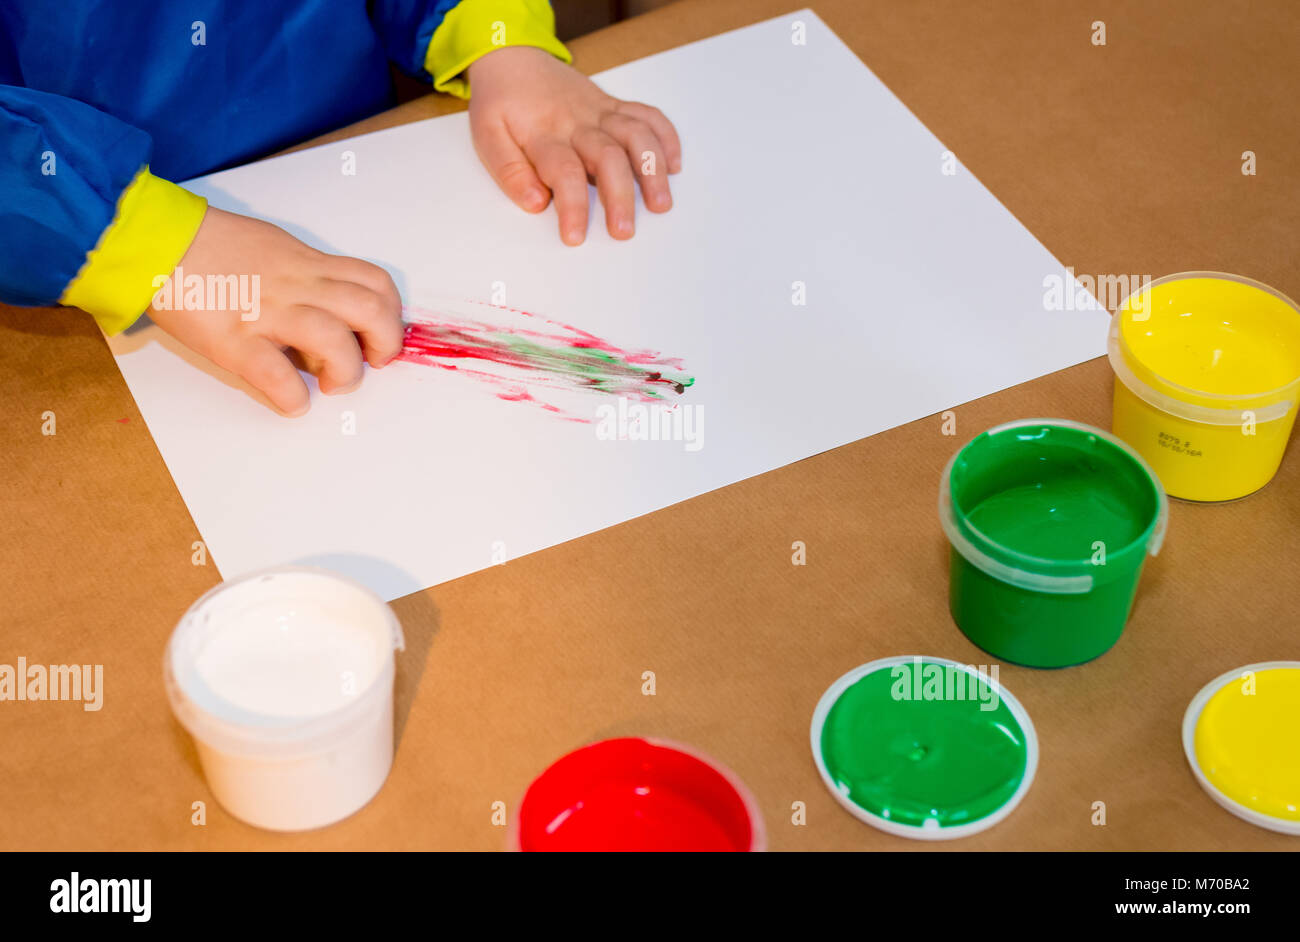 Child hands painted in colorful paits. Education, school, creativity and painting concept. Soft focus an blurry Stock Photo